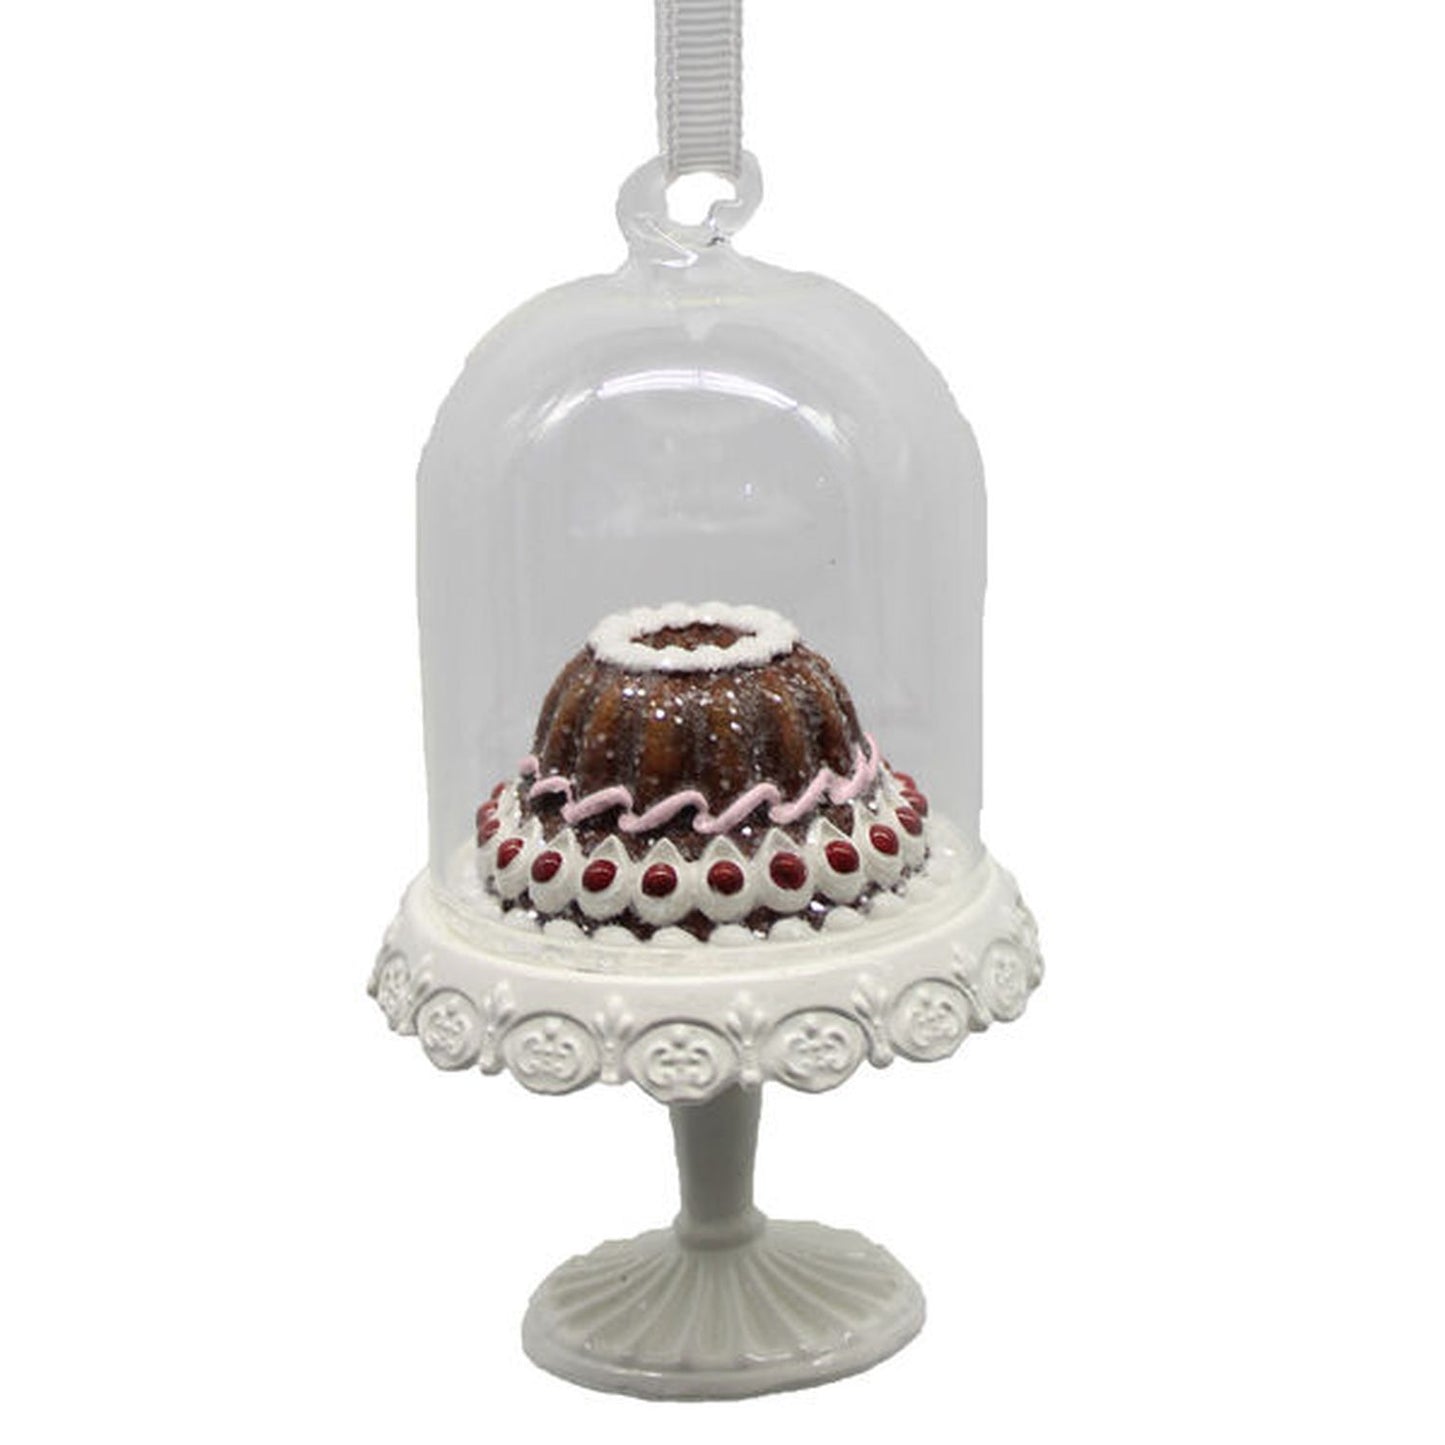 Gingerbread Sweet Shoppe Chocolate Gingerbread Cake In Cloche Ornament